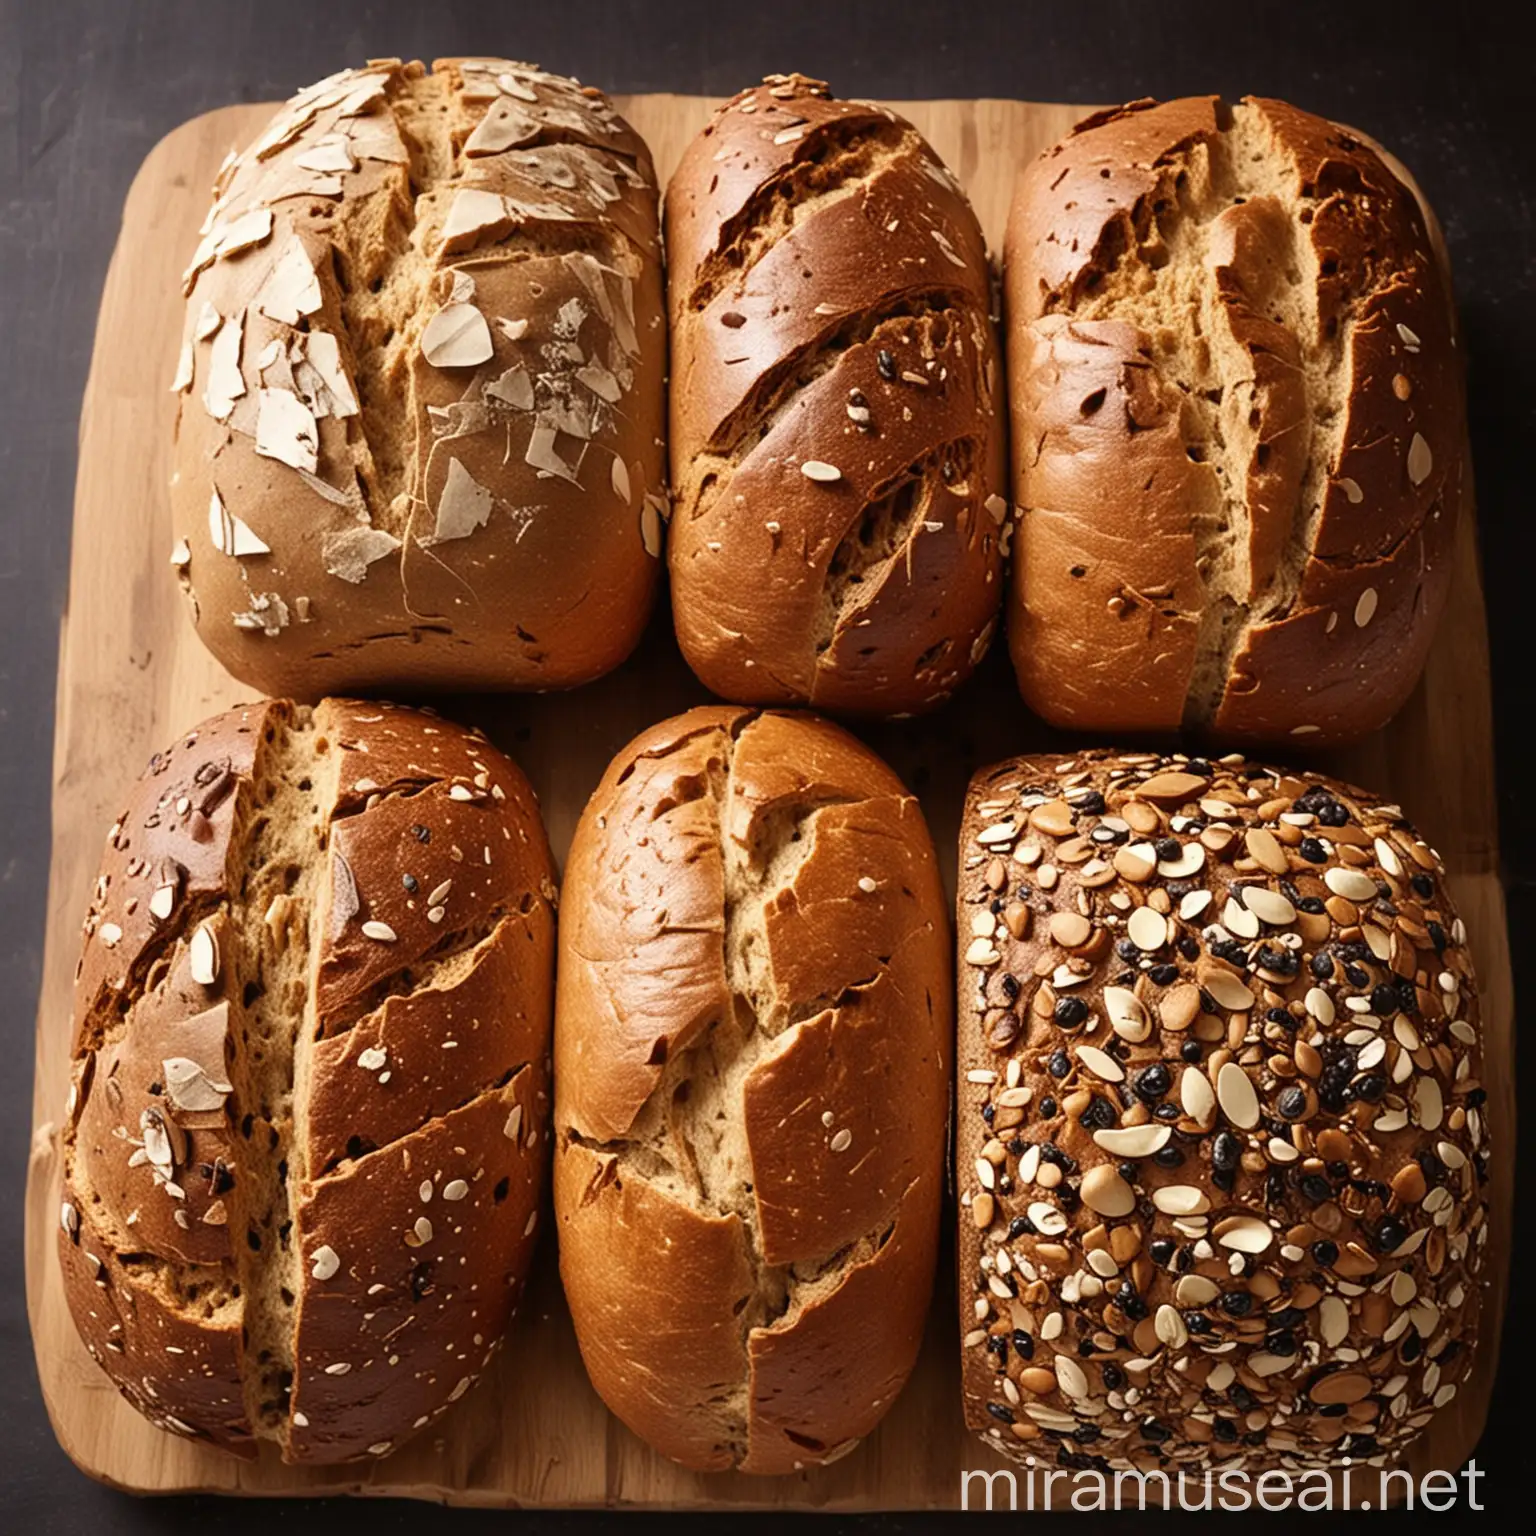 Assortment of Nutritious Bread Varieties for a Balanced Diet